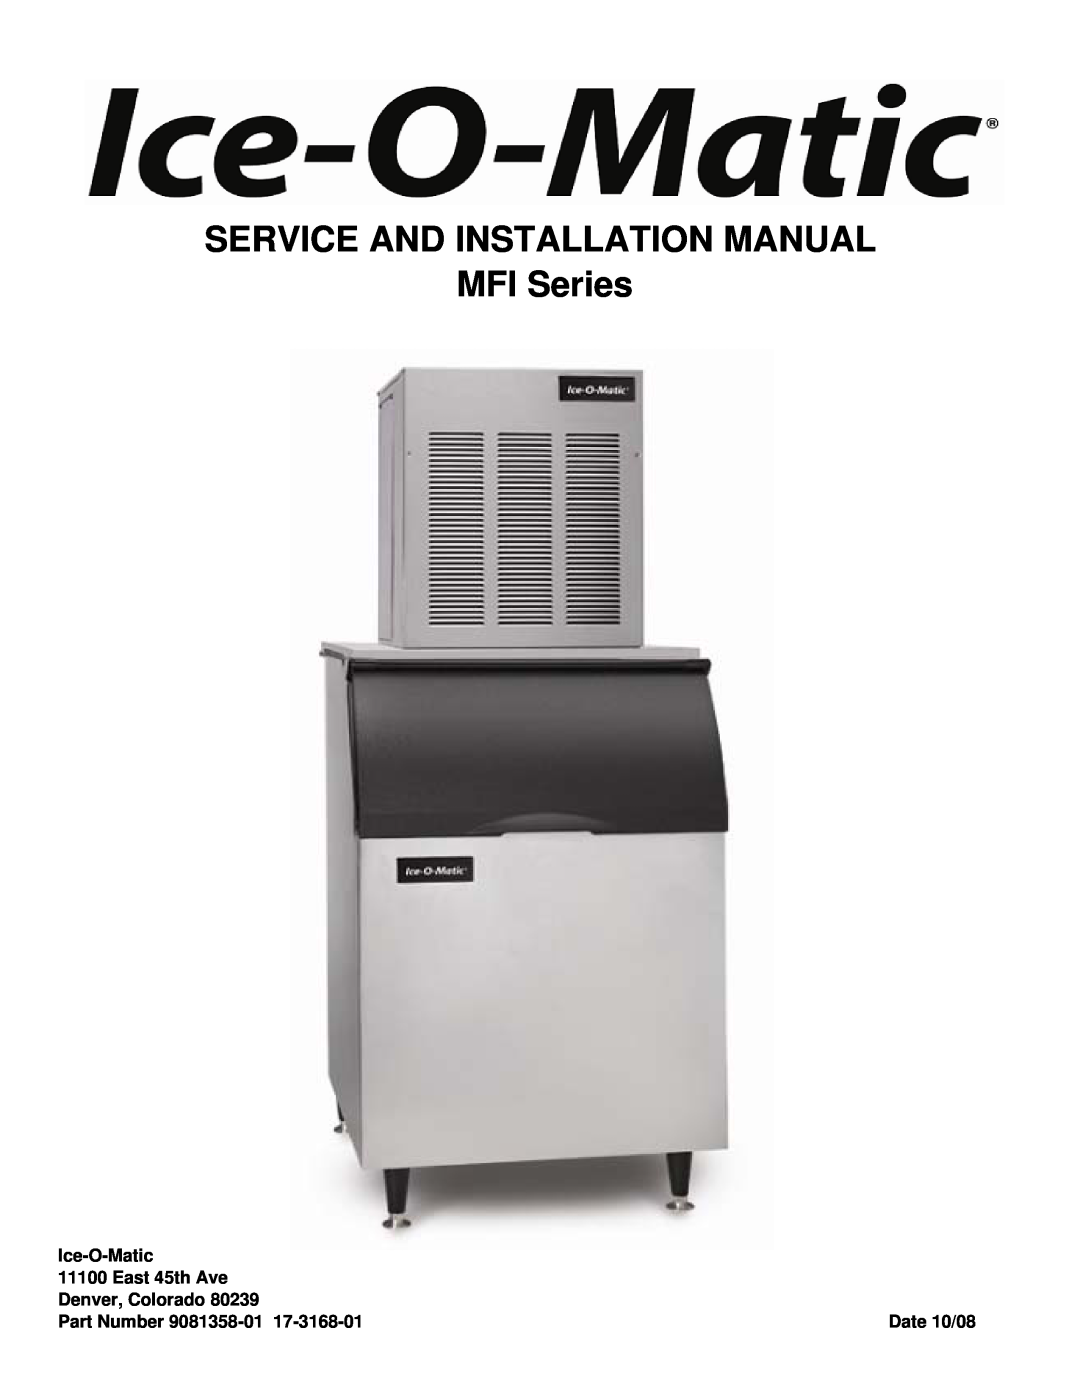 Ice-O-Matic installation manual SERVICE AND INSTALLATION MANUAL MFI Series, Ice-O-Matic, East 45th Ave, Part Number 